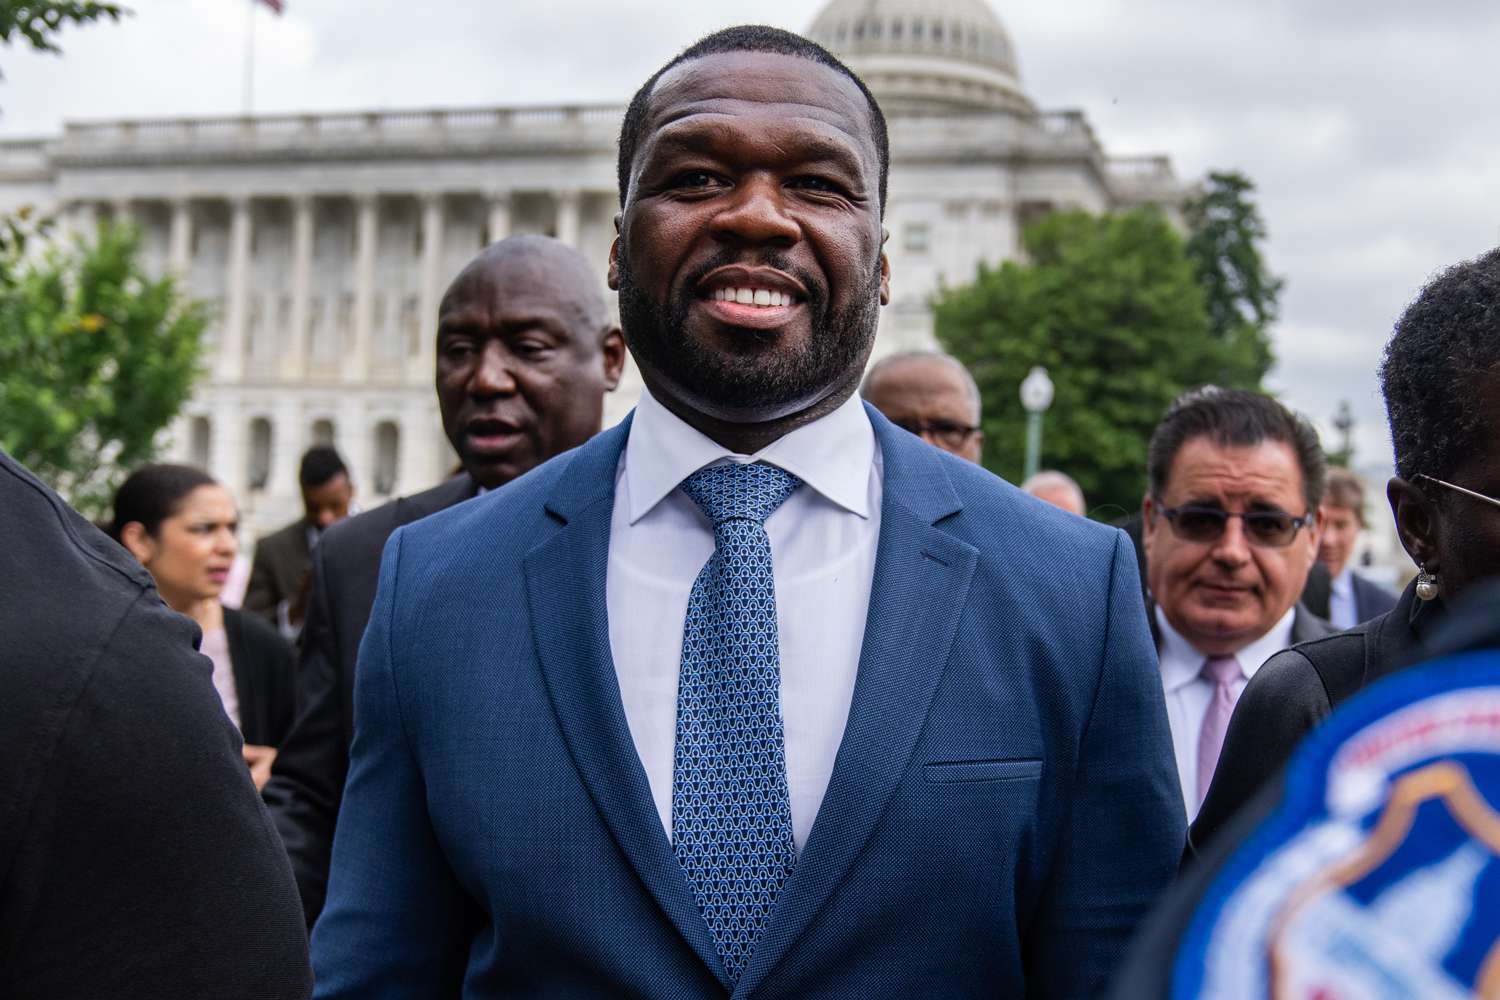 50 Cent Takes a Surprise Trip to Capitol Hill to Advocate for Black Entrepreneurs: 'Feels Really Good'